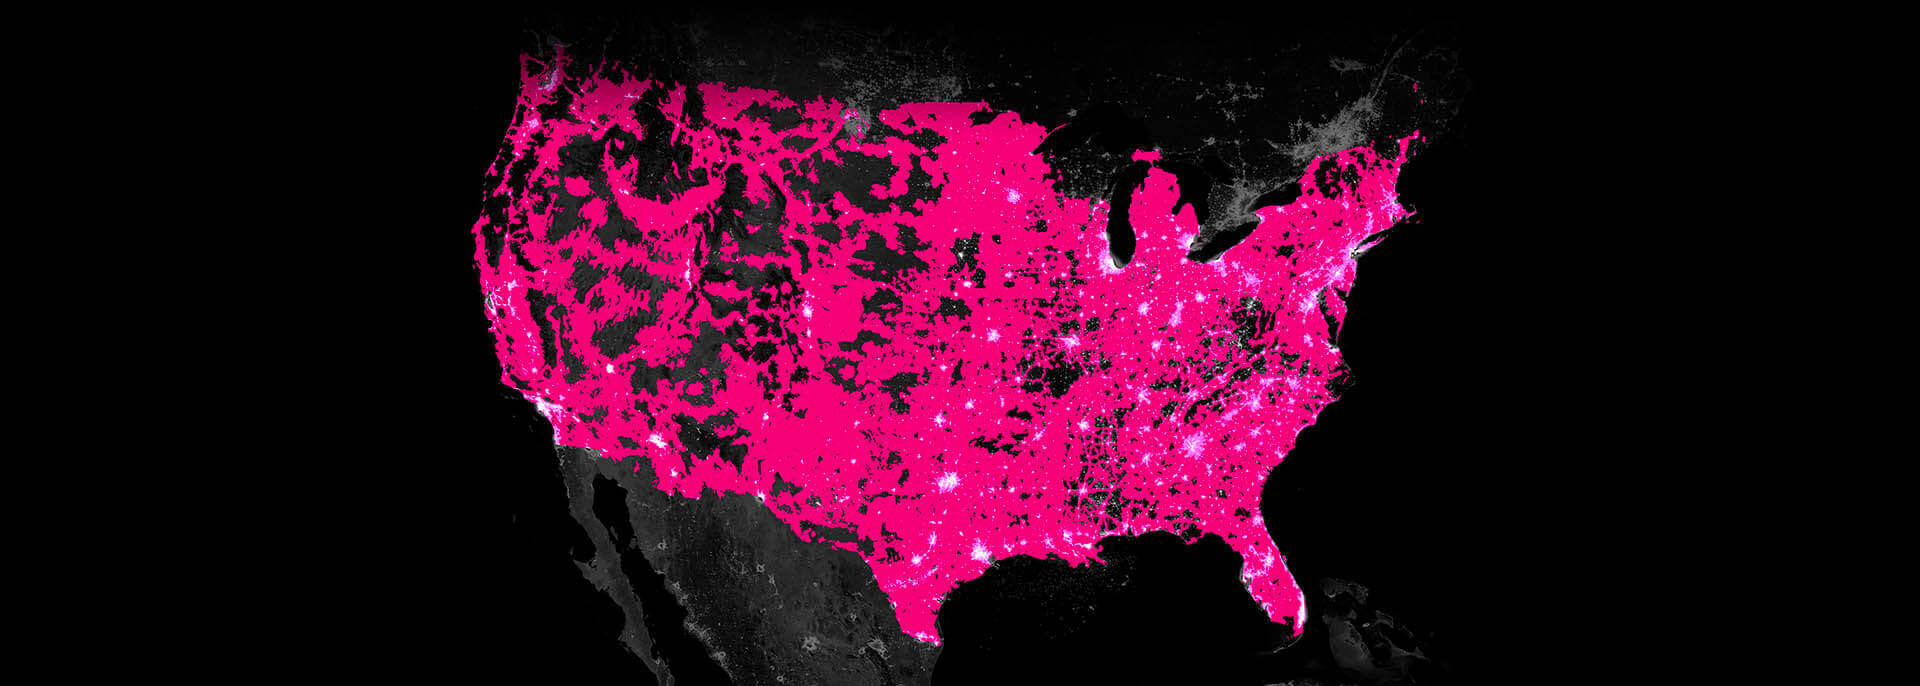 T-Mobile suffers data breach exposing personal information of over 1 million customers